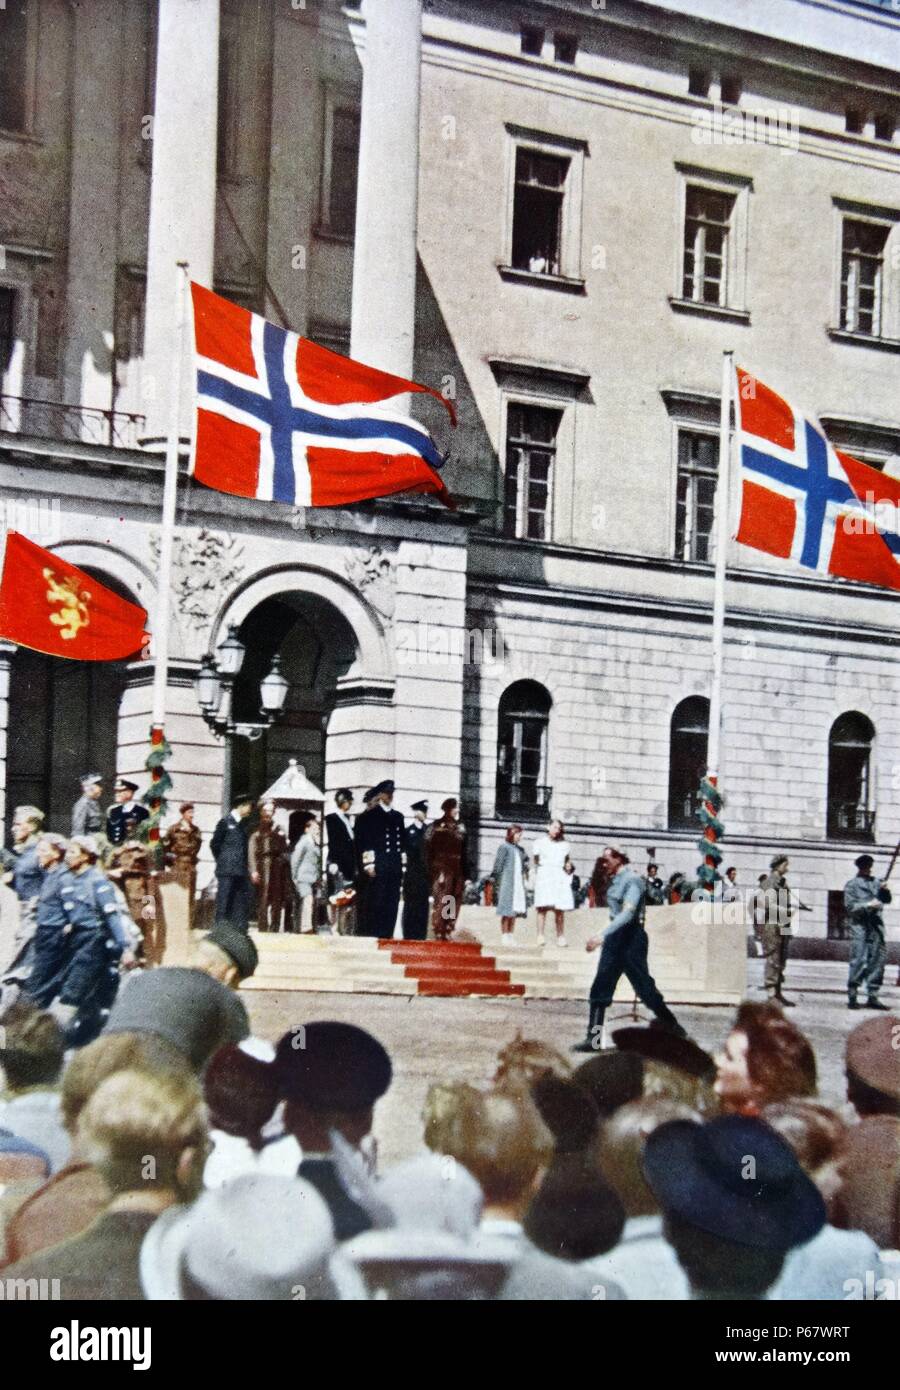 The King of Norway Haakon VII and his family celebrate the liberation of Norway after World War Two Stock Photo